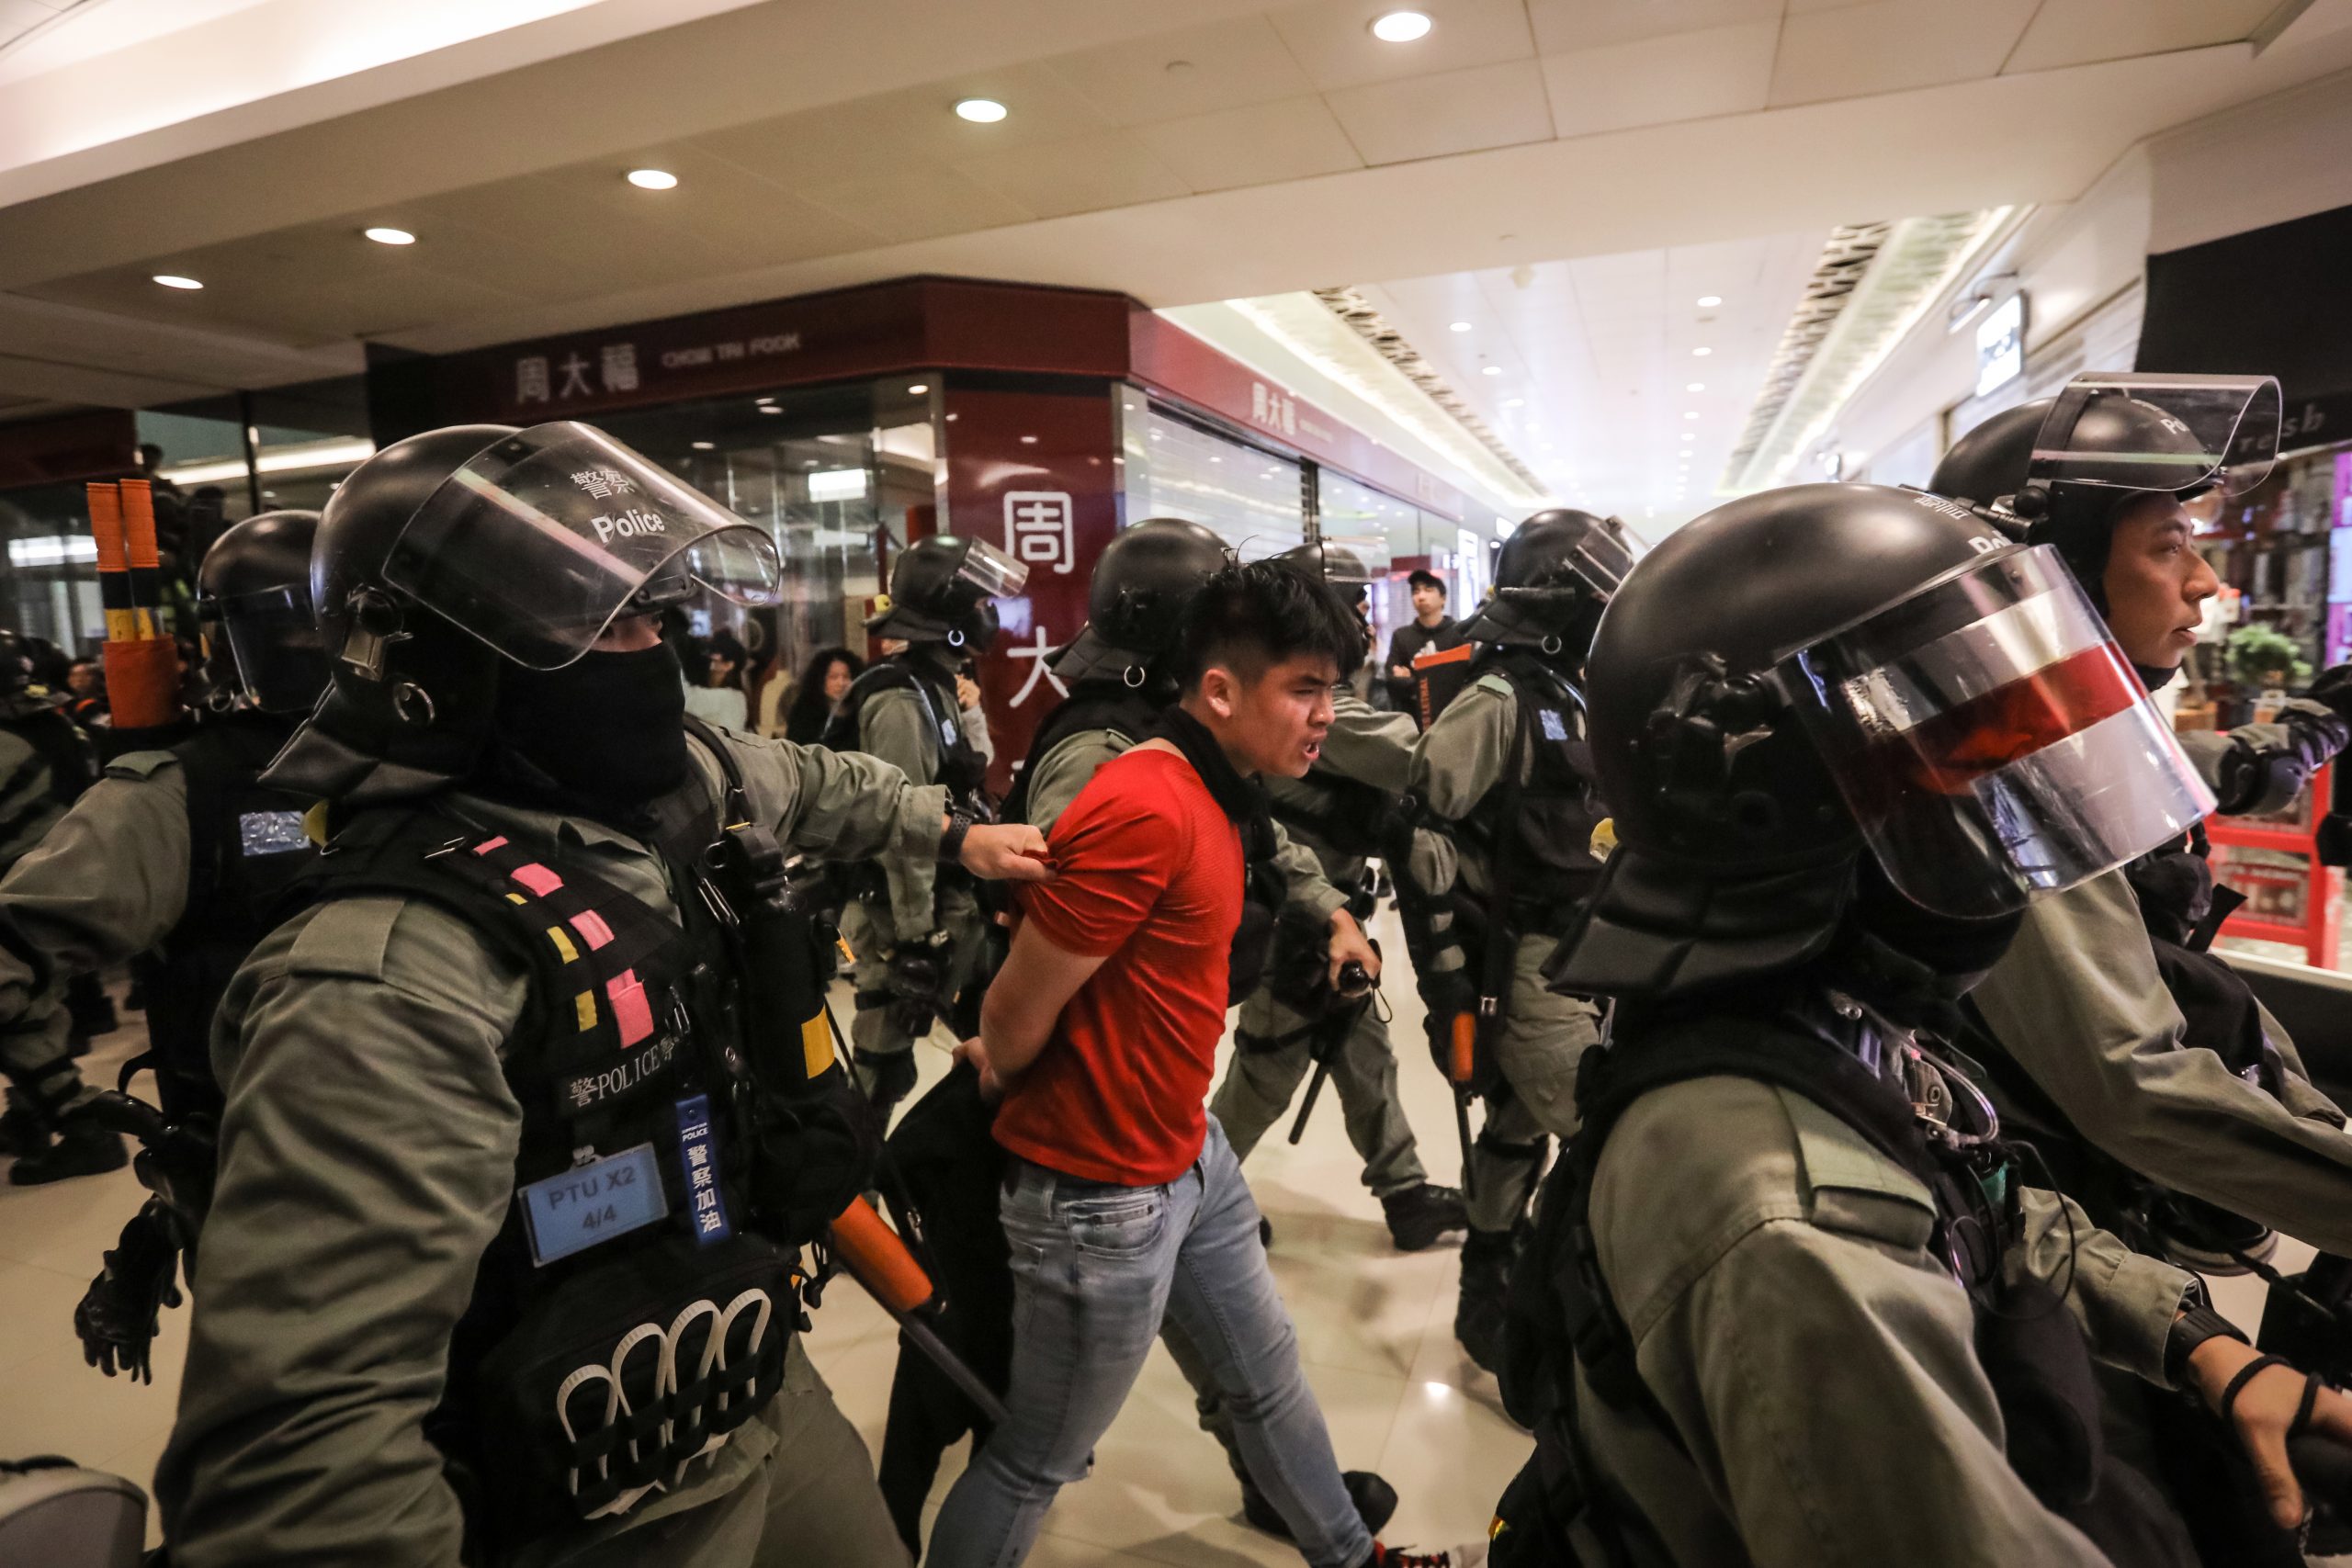 epa08092791 A riot police officer detains a protester after using pepper spray on him during a protest in Sheung Shui in Hong Kong, China, 28 December 2019. Protests flared up in malls in the outlying districts on Hong Kong as the new year approaches. Hong Kong has entered its seventh month of mass protests, which were originally triggered by a now withdrawn extradition bill, and have since turned into a wider pro-democracy movement.  EPA/VIVEK PRAKASH